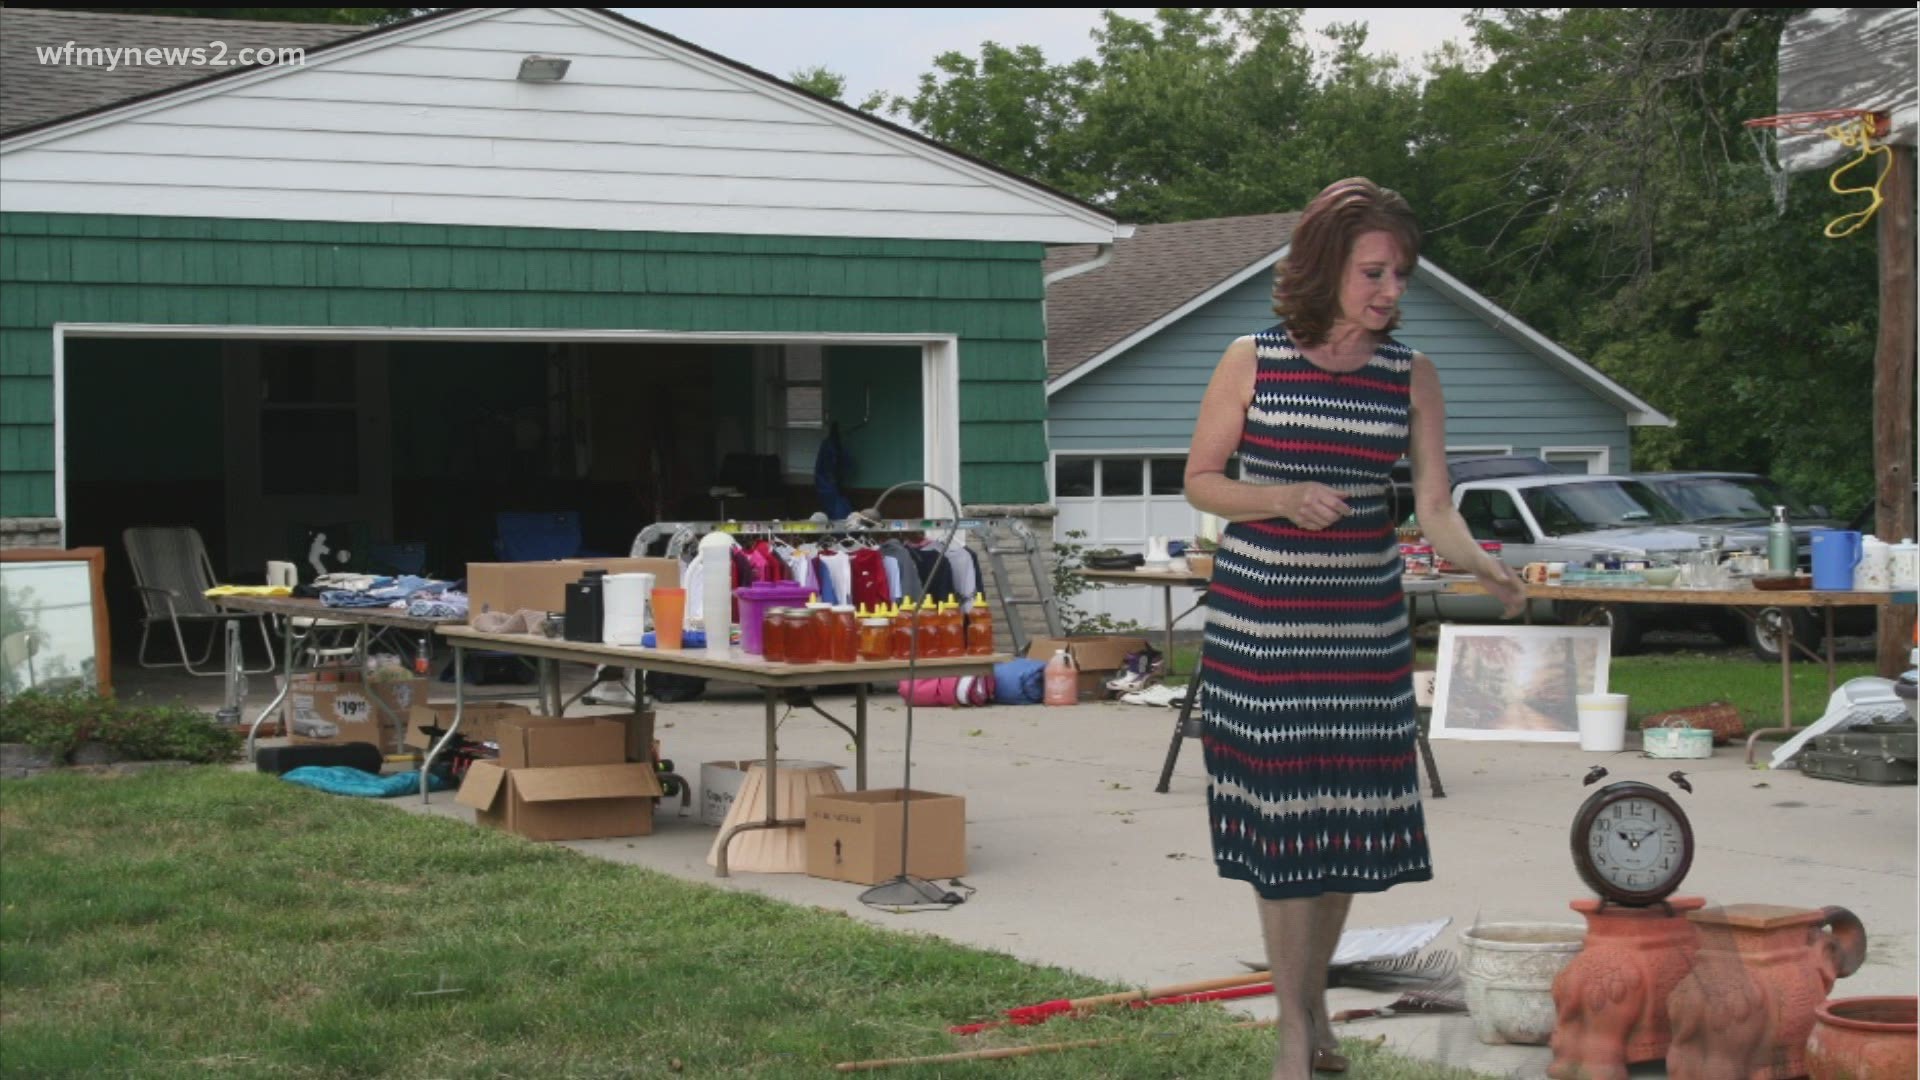 The 301 Endless Yard Sale is back this year on June 18 - 19 with 100 miles of yard sales on Highway 301.